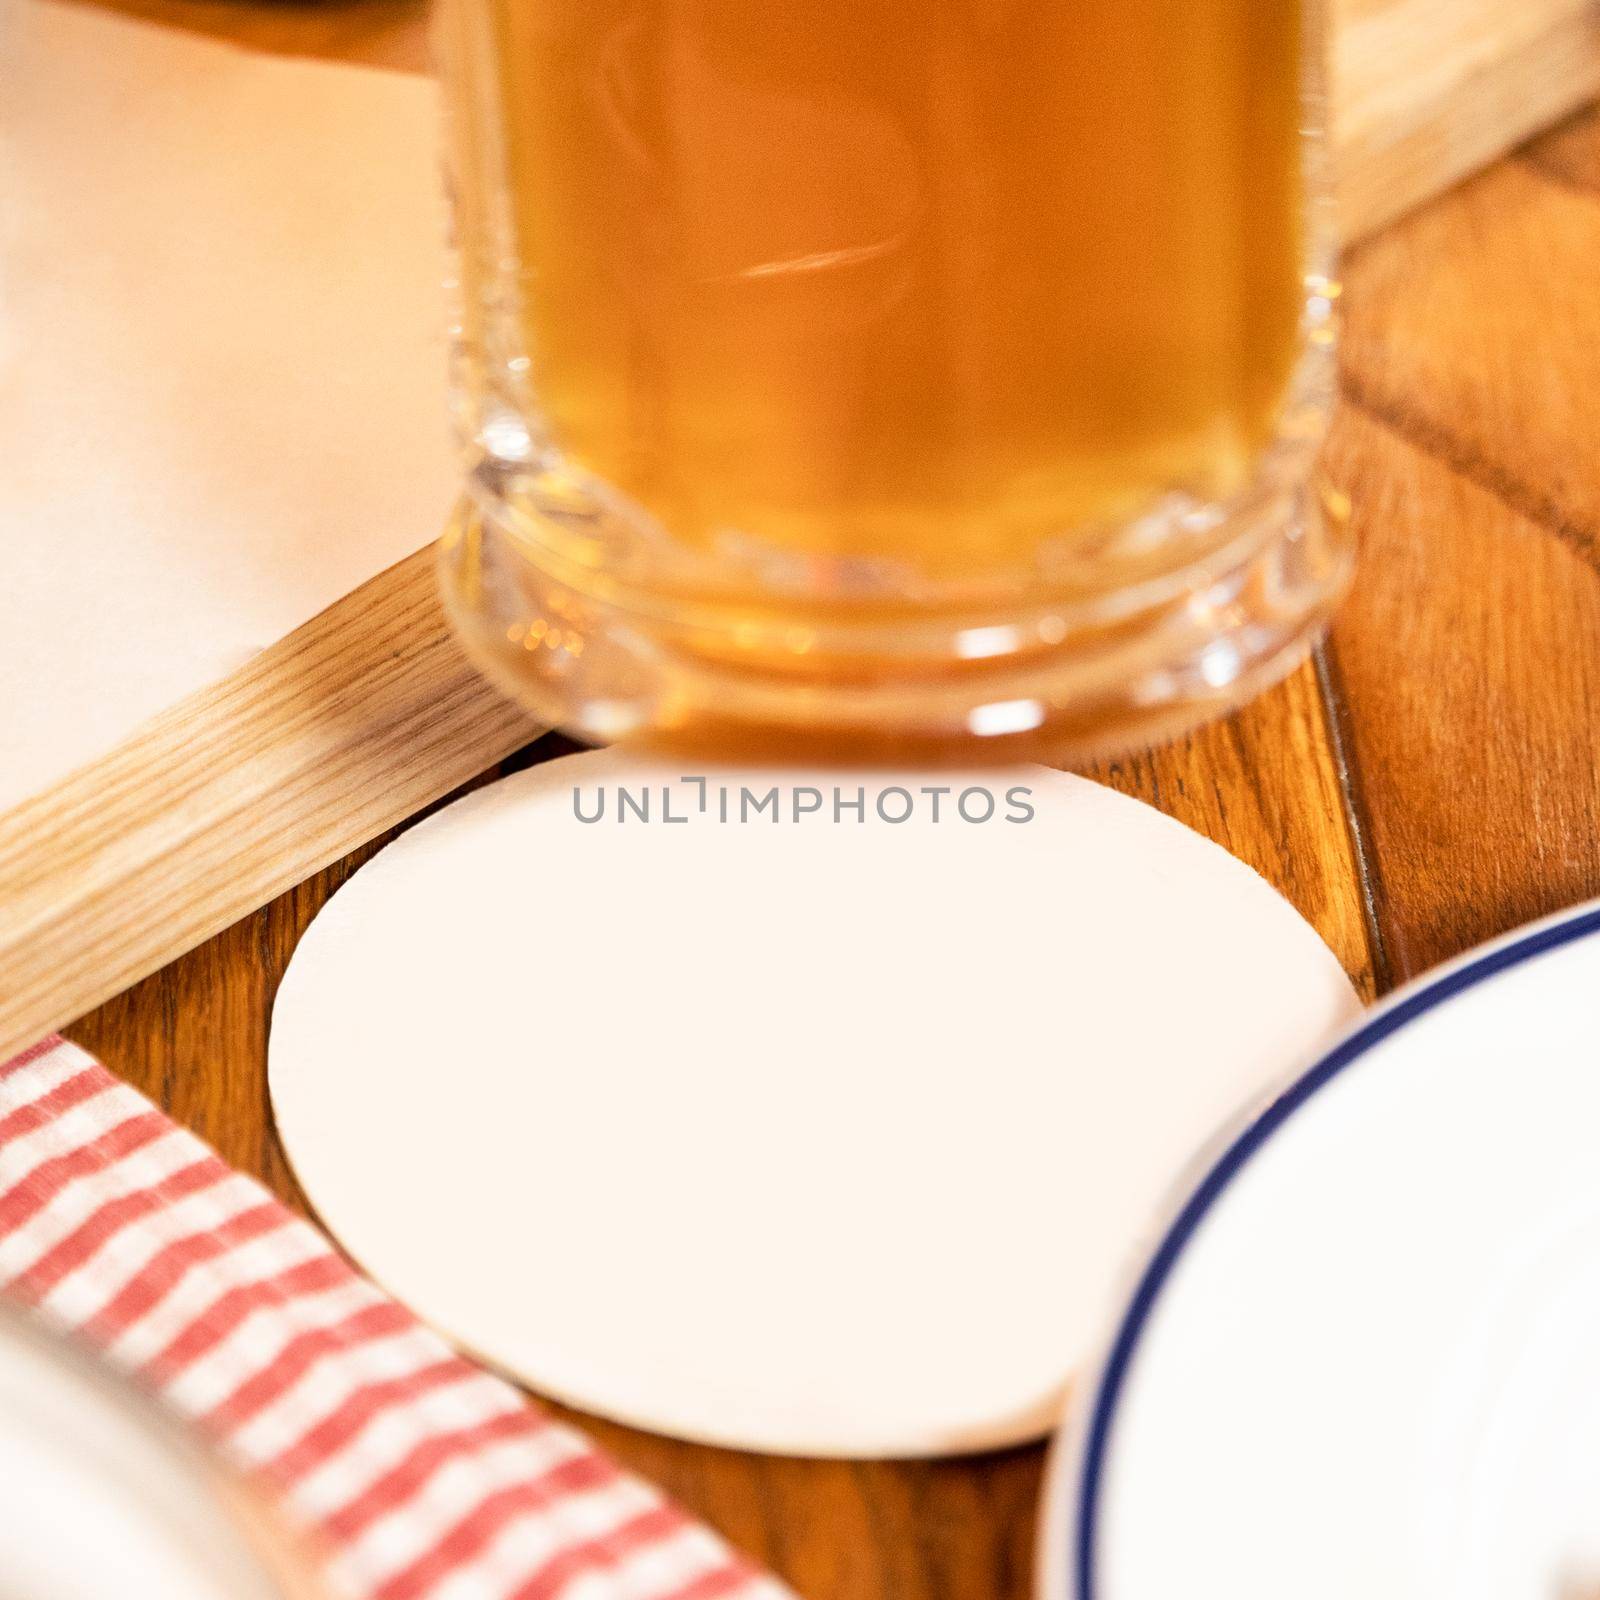 White place for logo, name bellow beer drink mug glass